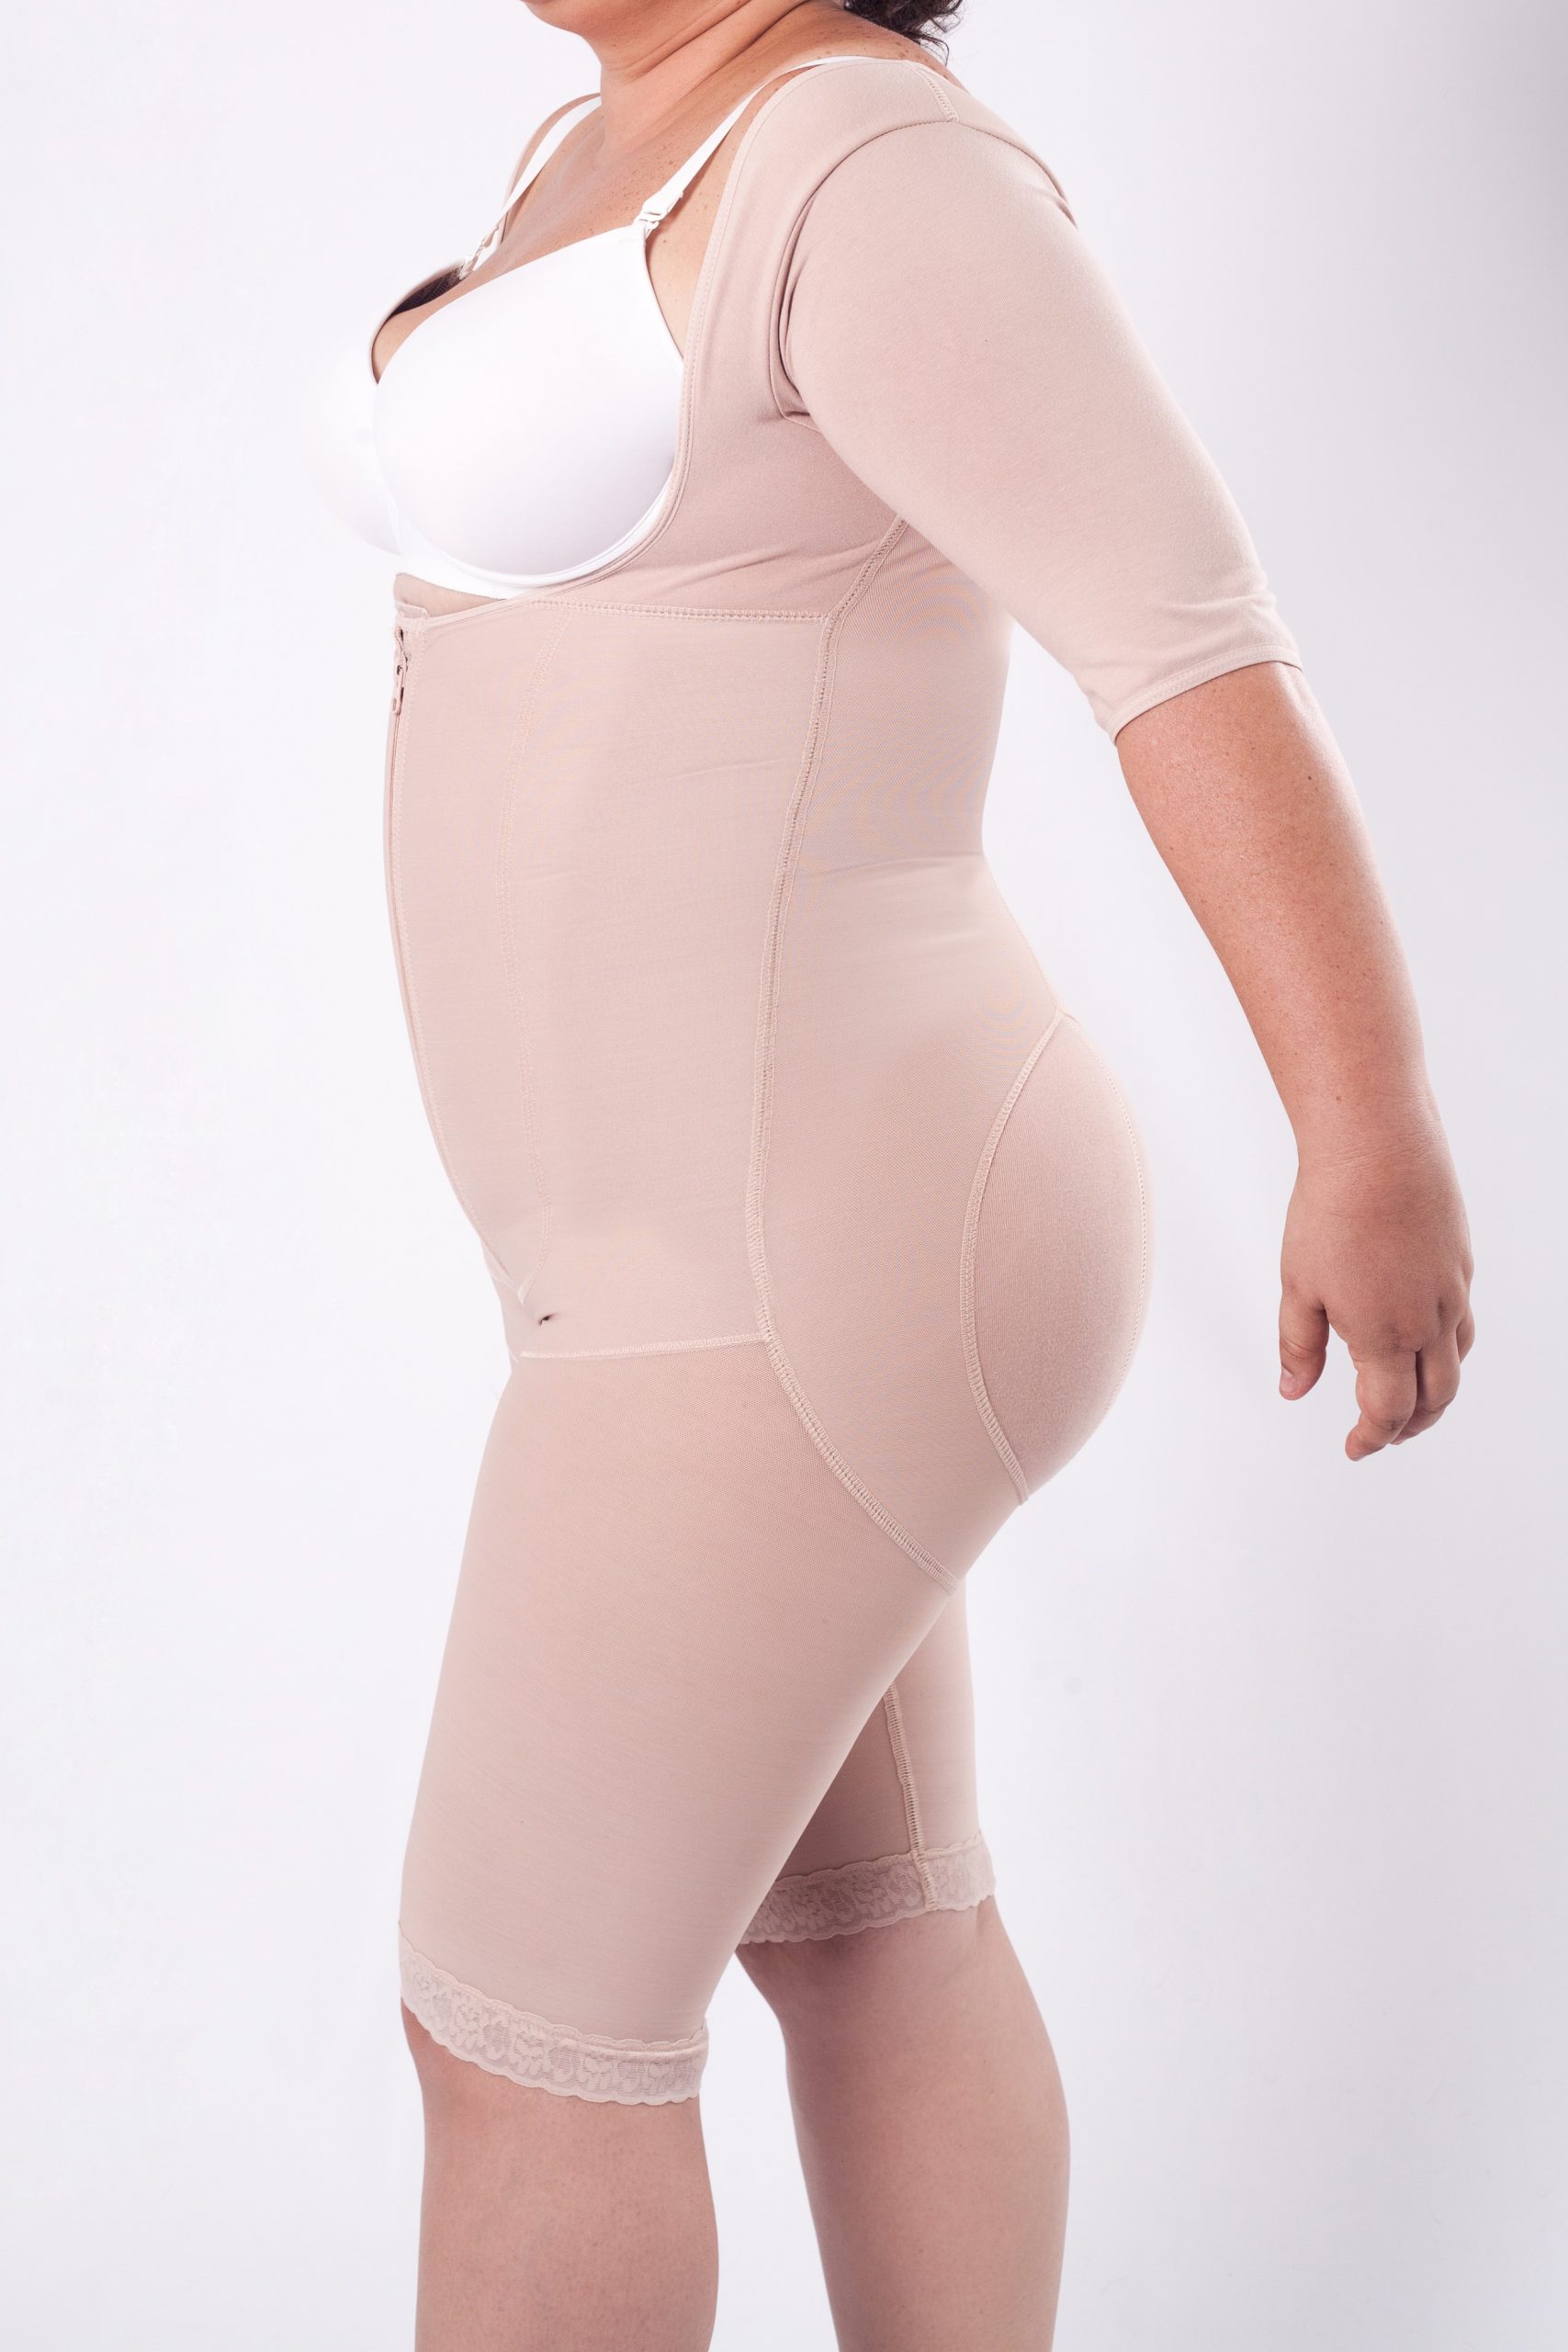 Girdless Body shaper with sleeves armholes and pantyhose